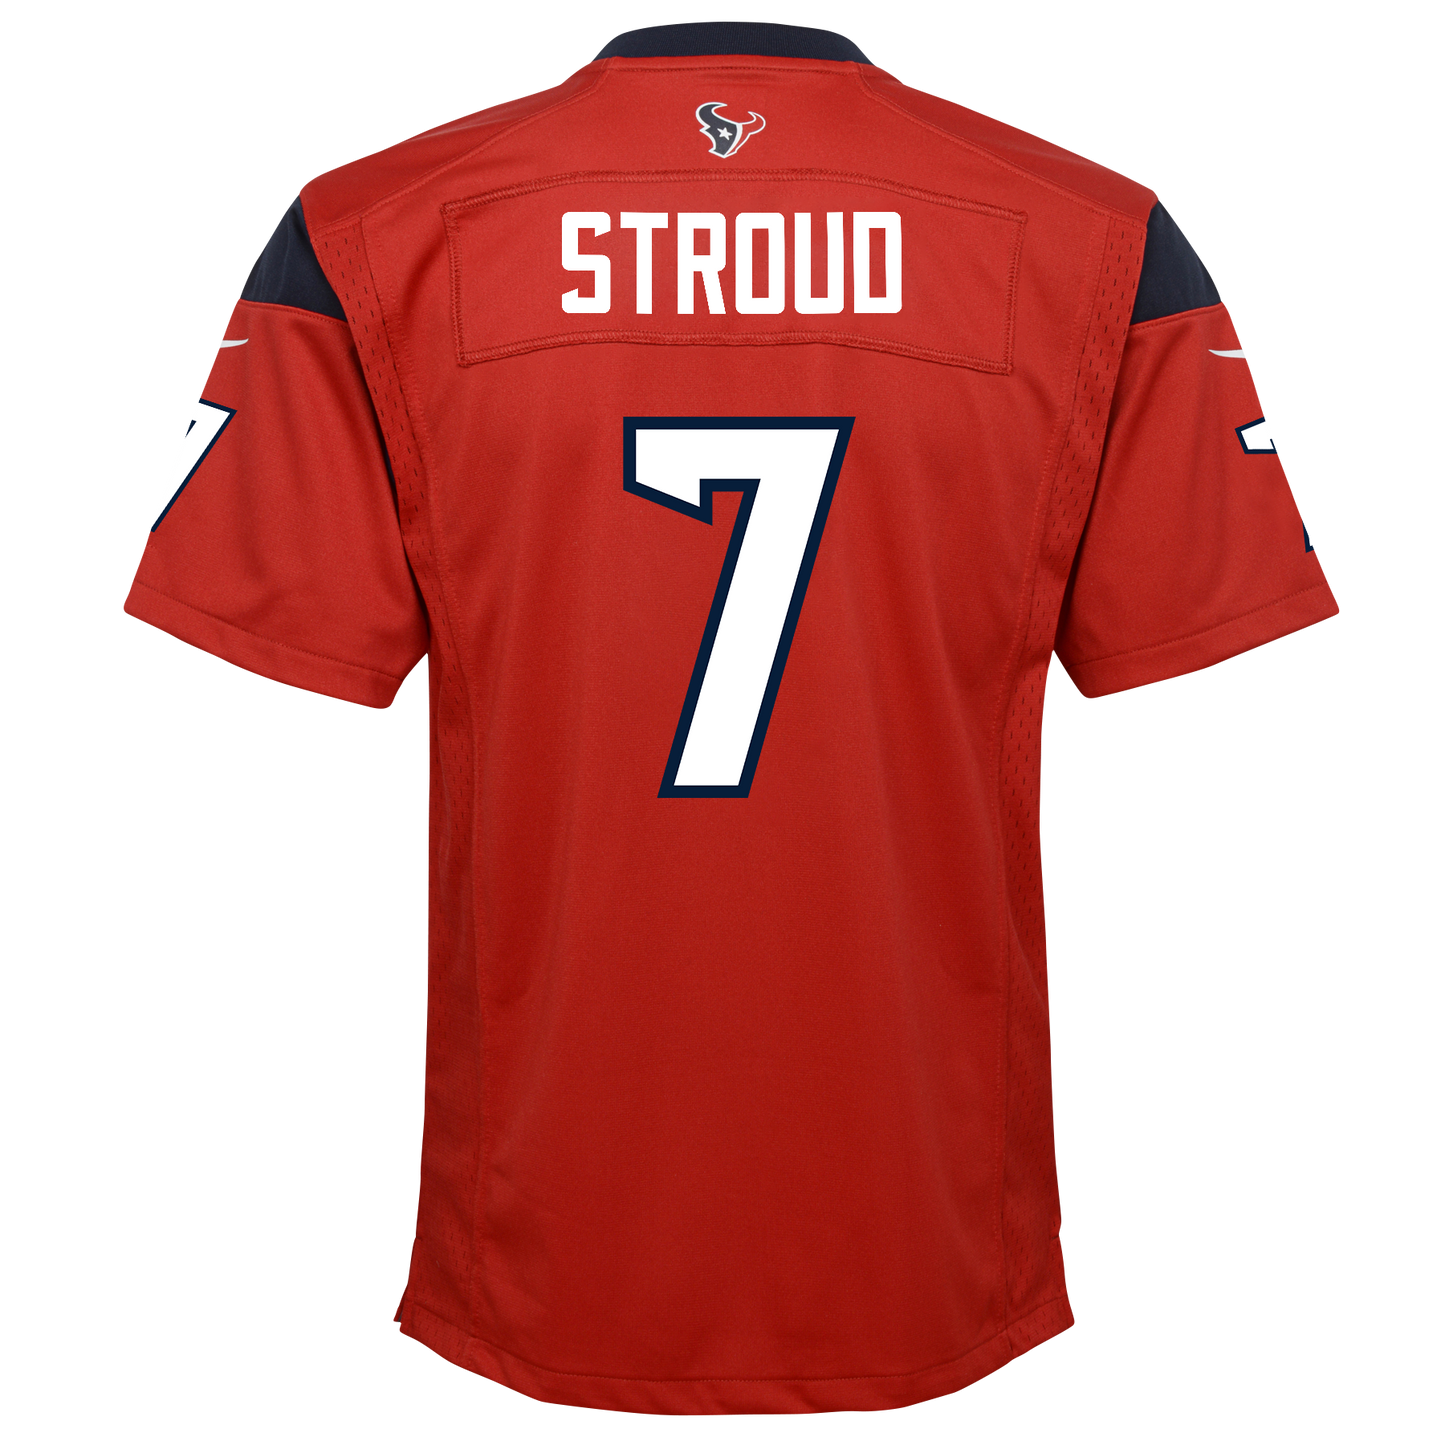 Youth Houston Texans C.J. Stroud Nike Alternate Red Game Jersey